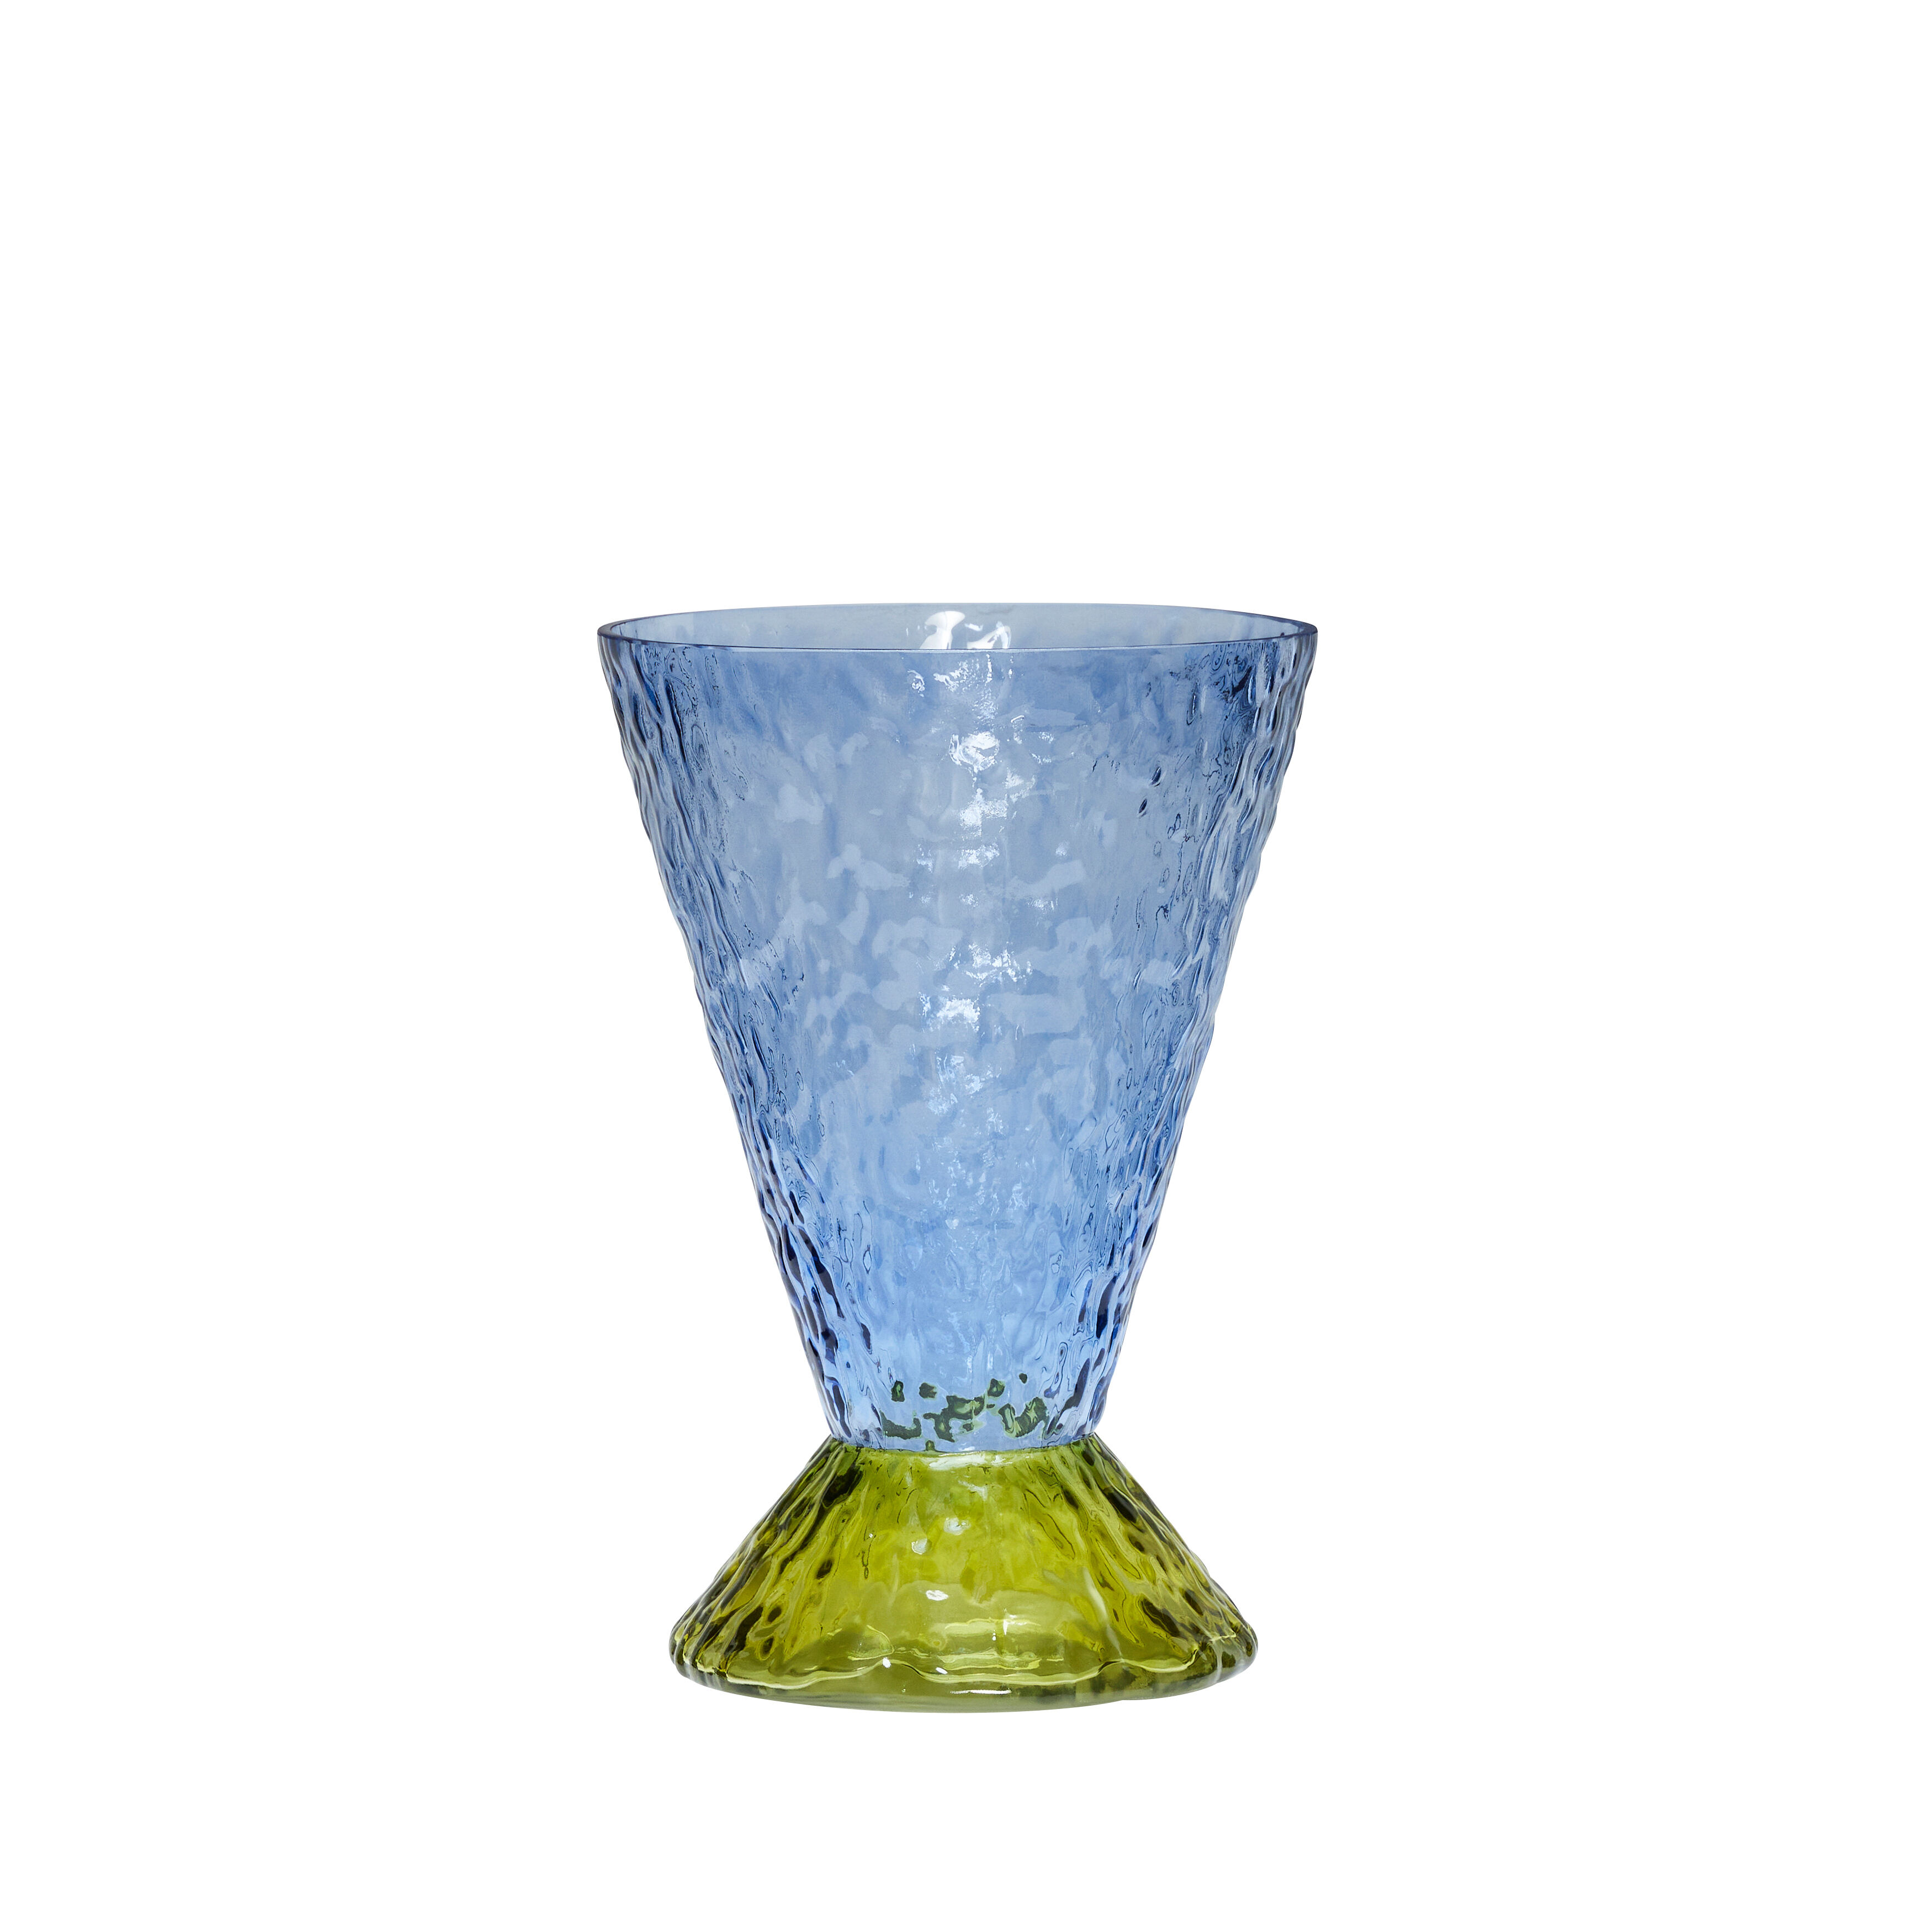 Hubsch Abyss Vase in Light Blue and Olive